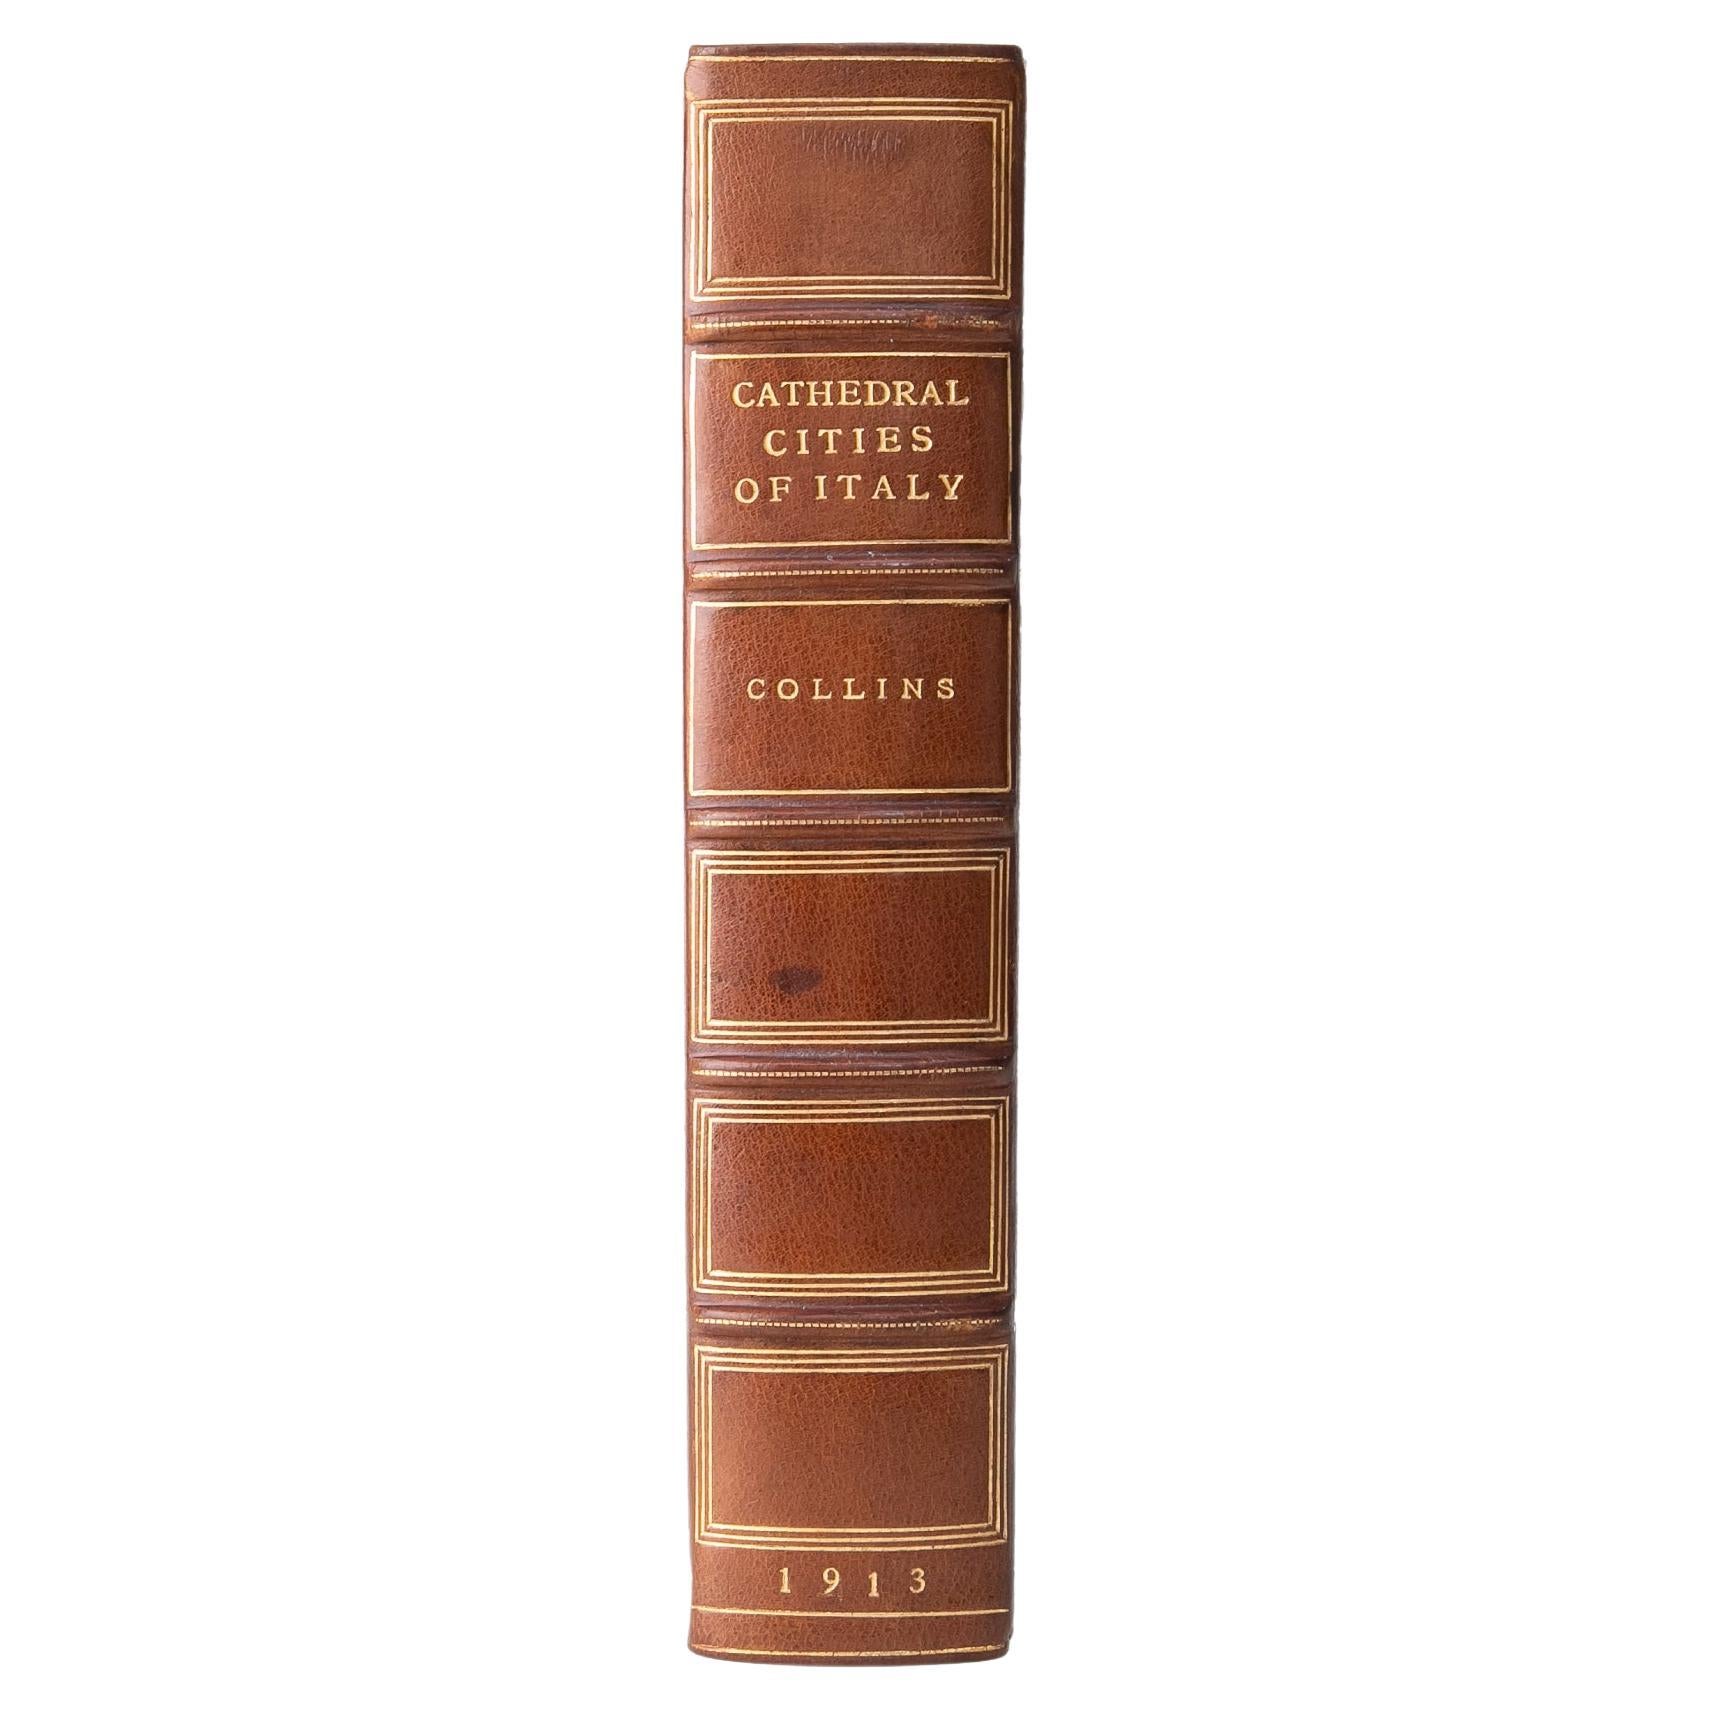 1 Volume. W.W. Collins, Cathedral Cities of Italy. For Sale